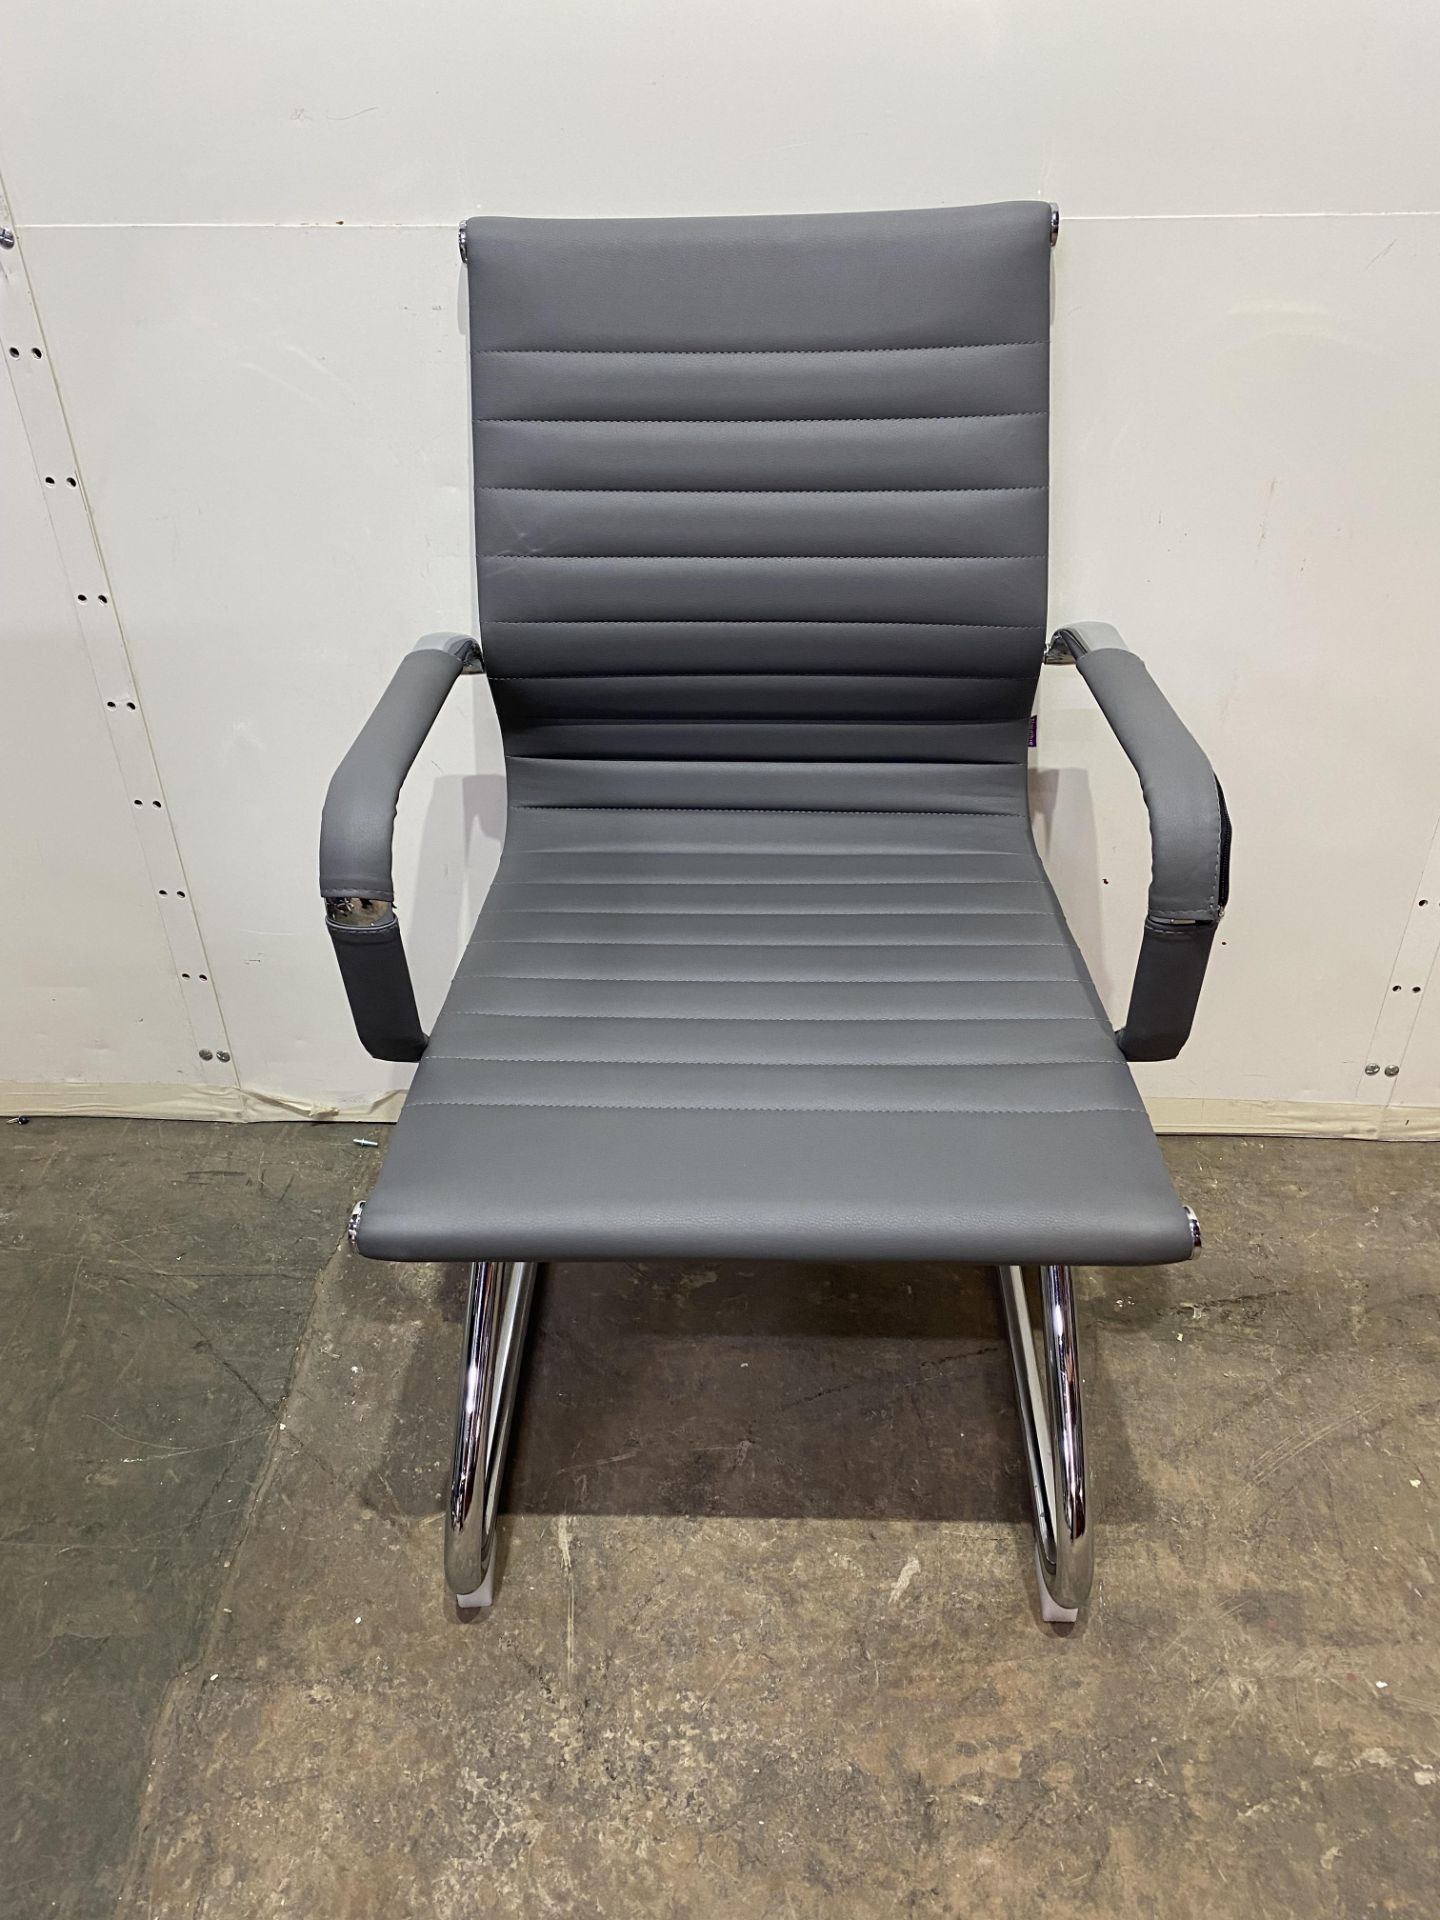 5 x Grey Chrome Frame Conference Chairs - Image 5 of 5